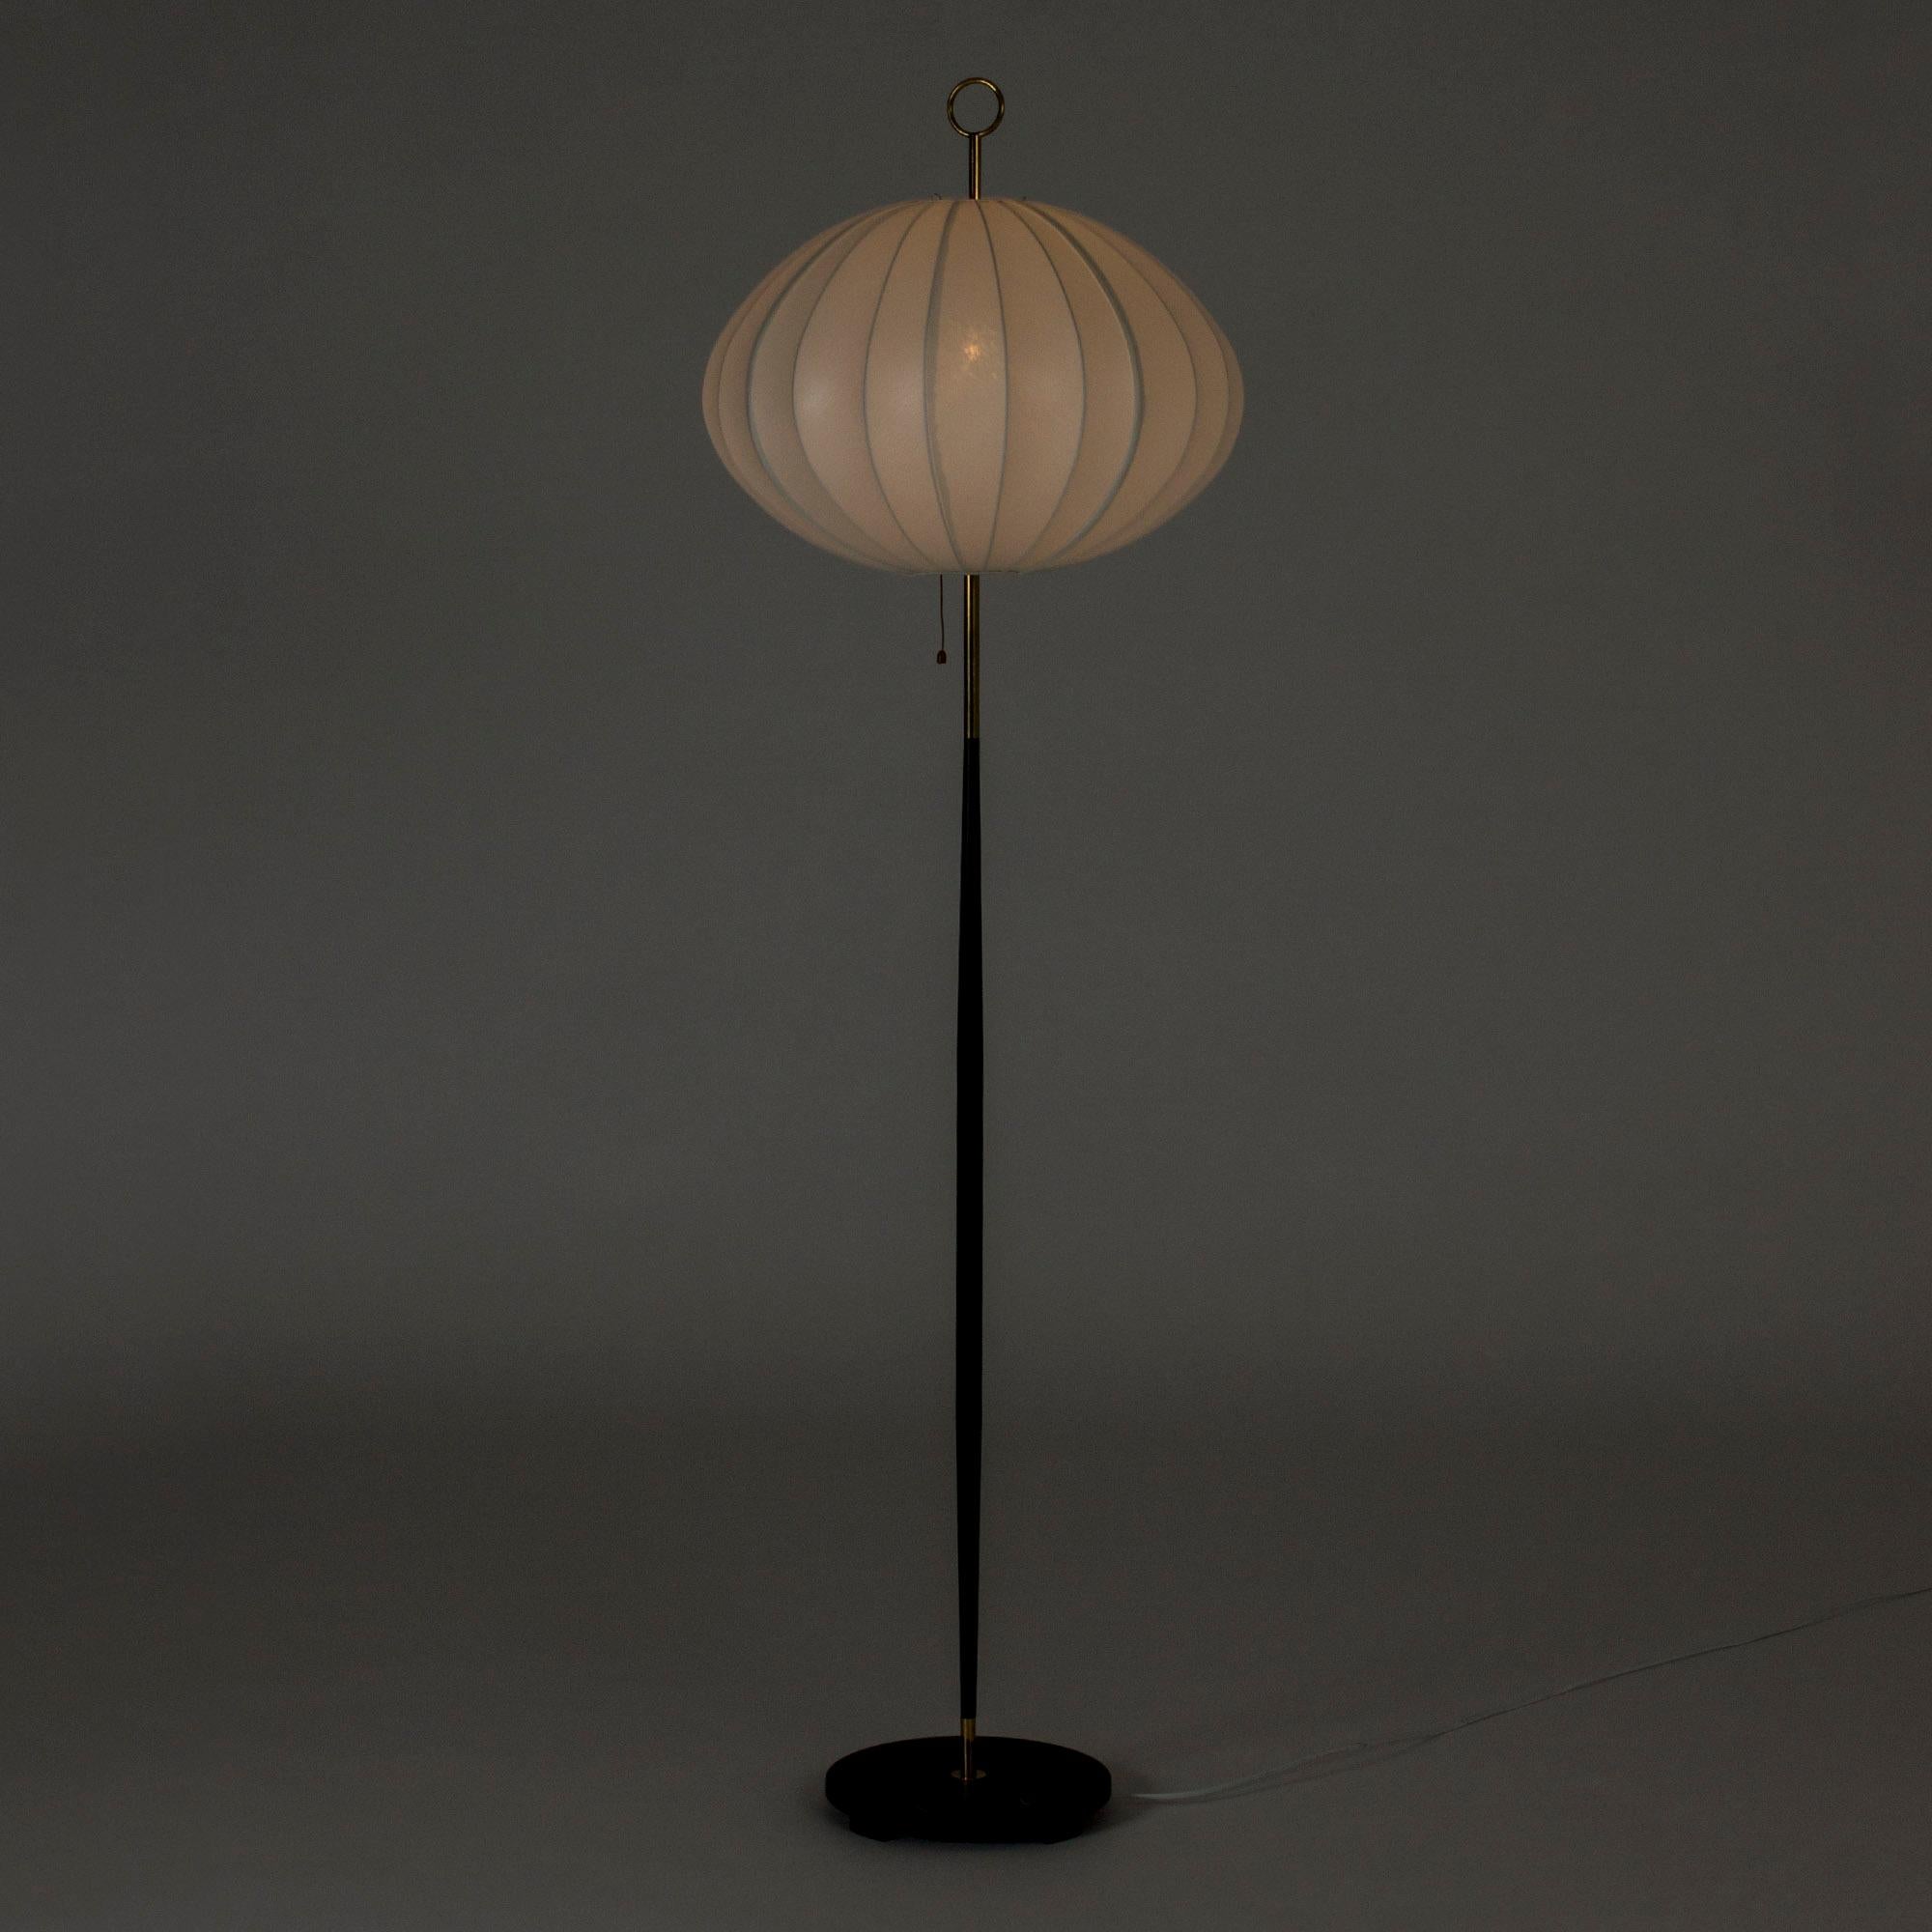 Amazing floor lamp by Svend Aage Holm Sørensen, with a black lacquered metal base. Large, oval lamp shade that spreads a beautiful light, decorative brass ring at the top. Great contrast between the wide shade and the slender base.